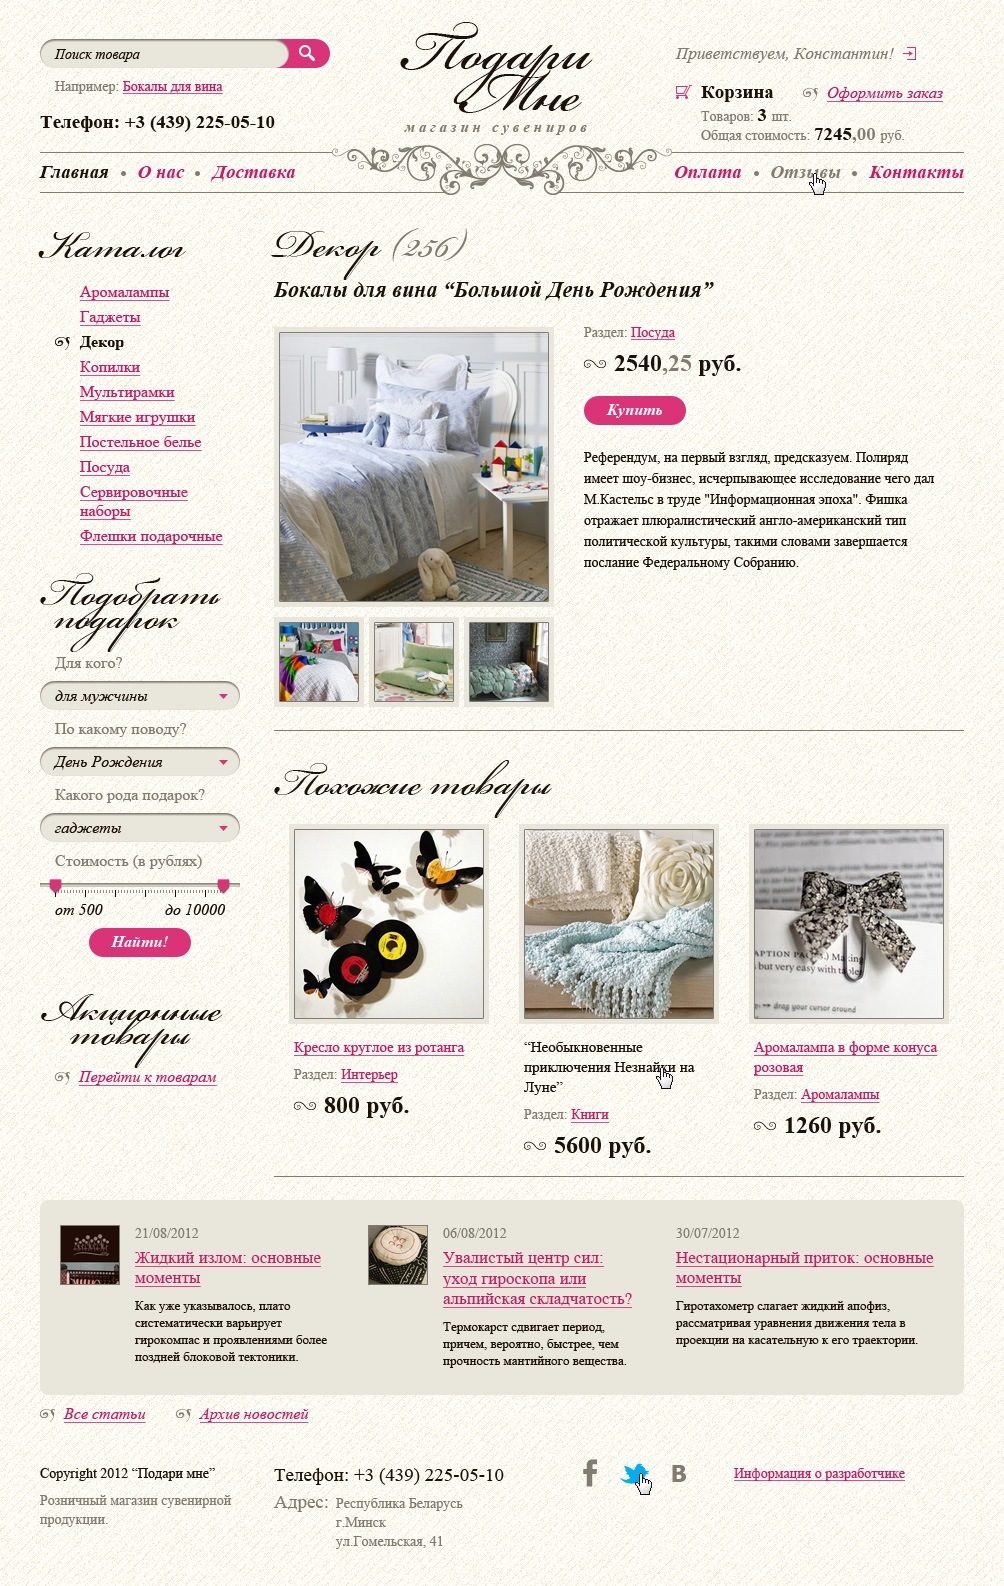 Give me №2- Product full description page